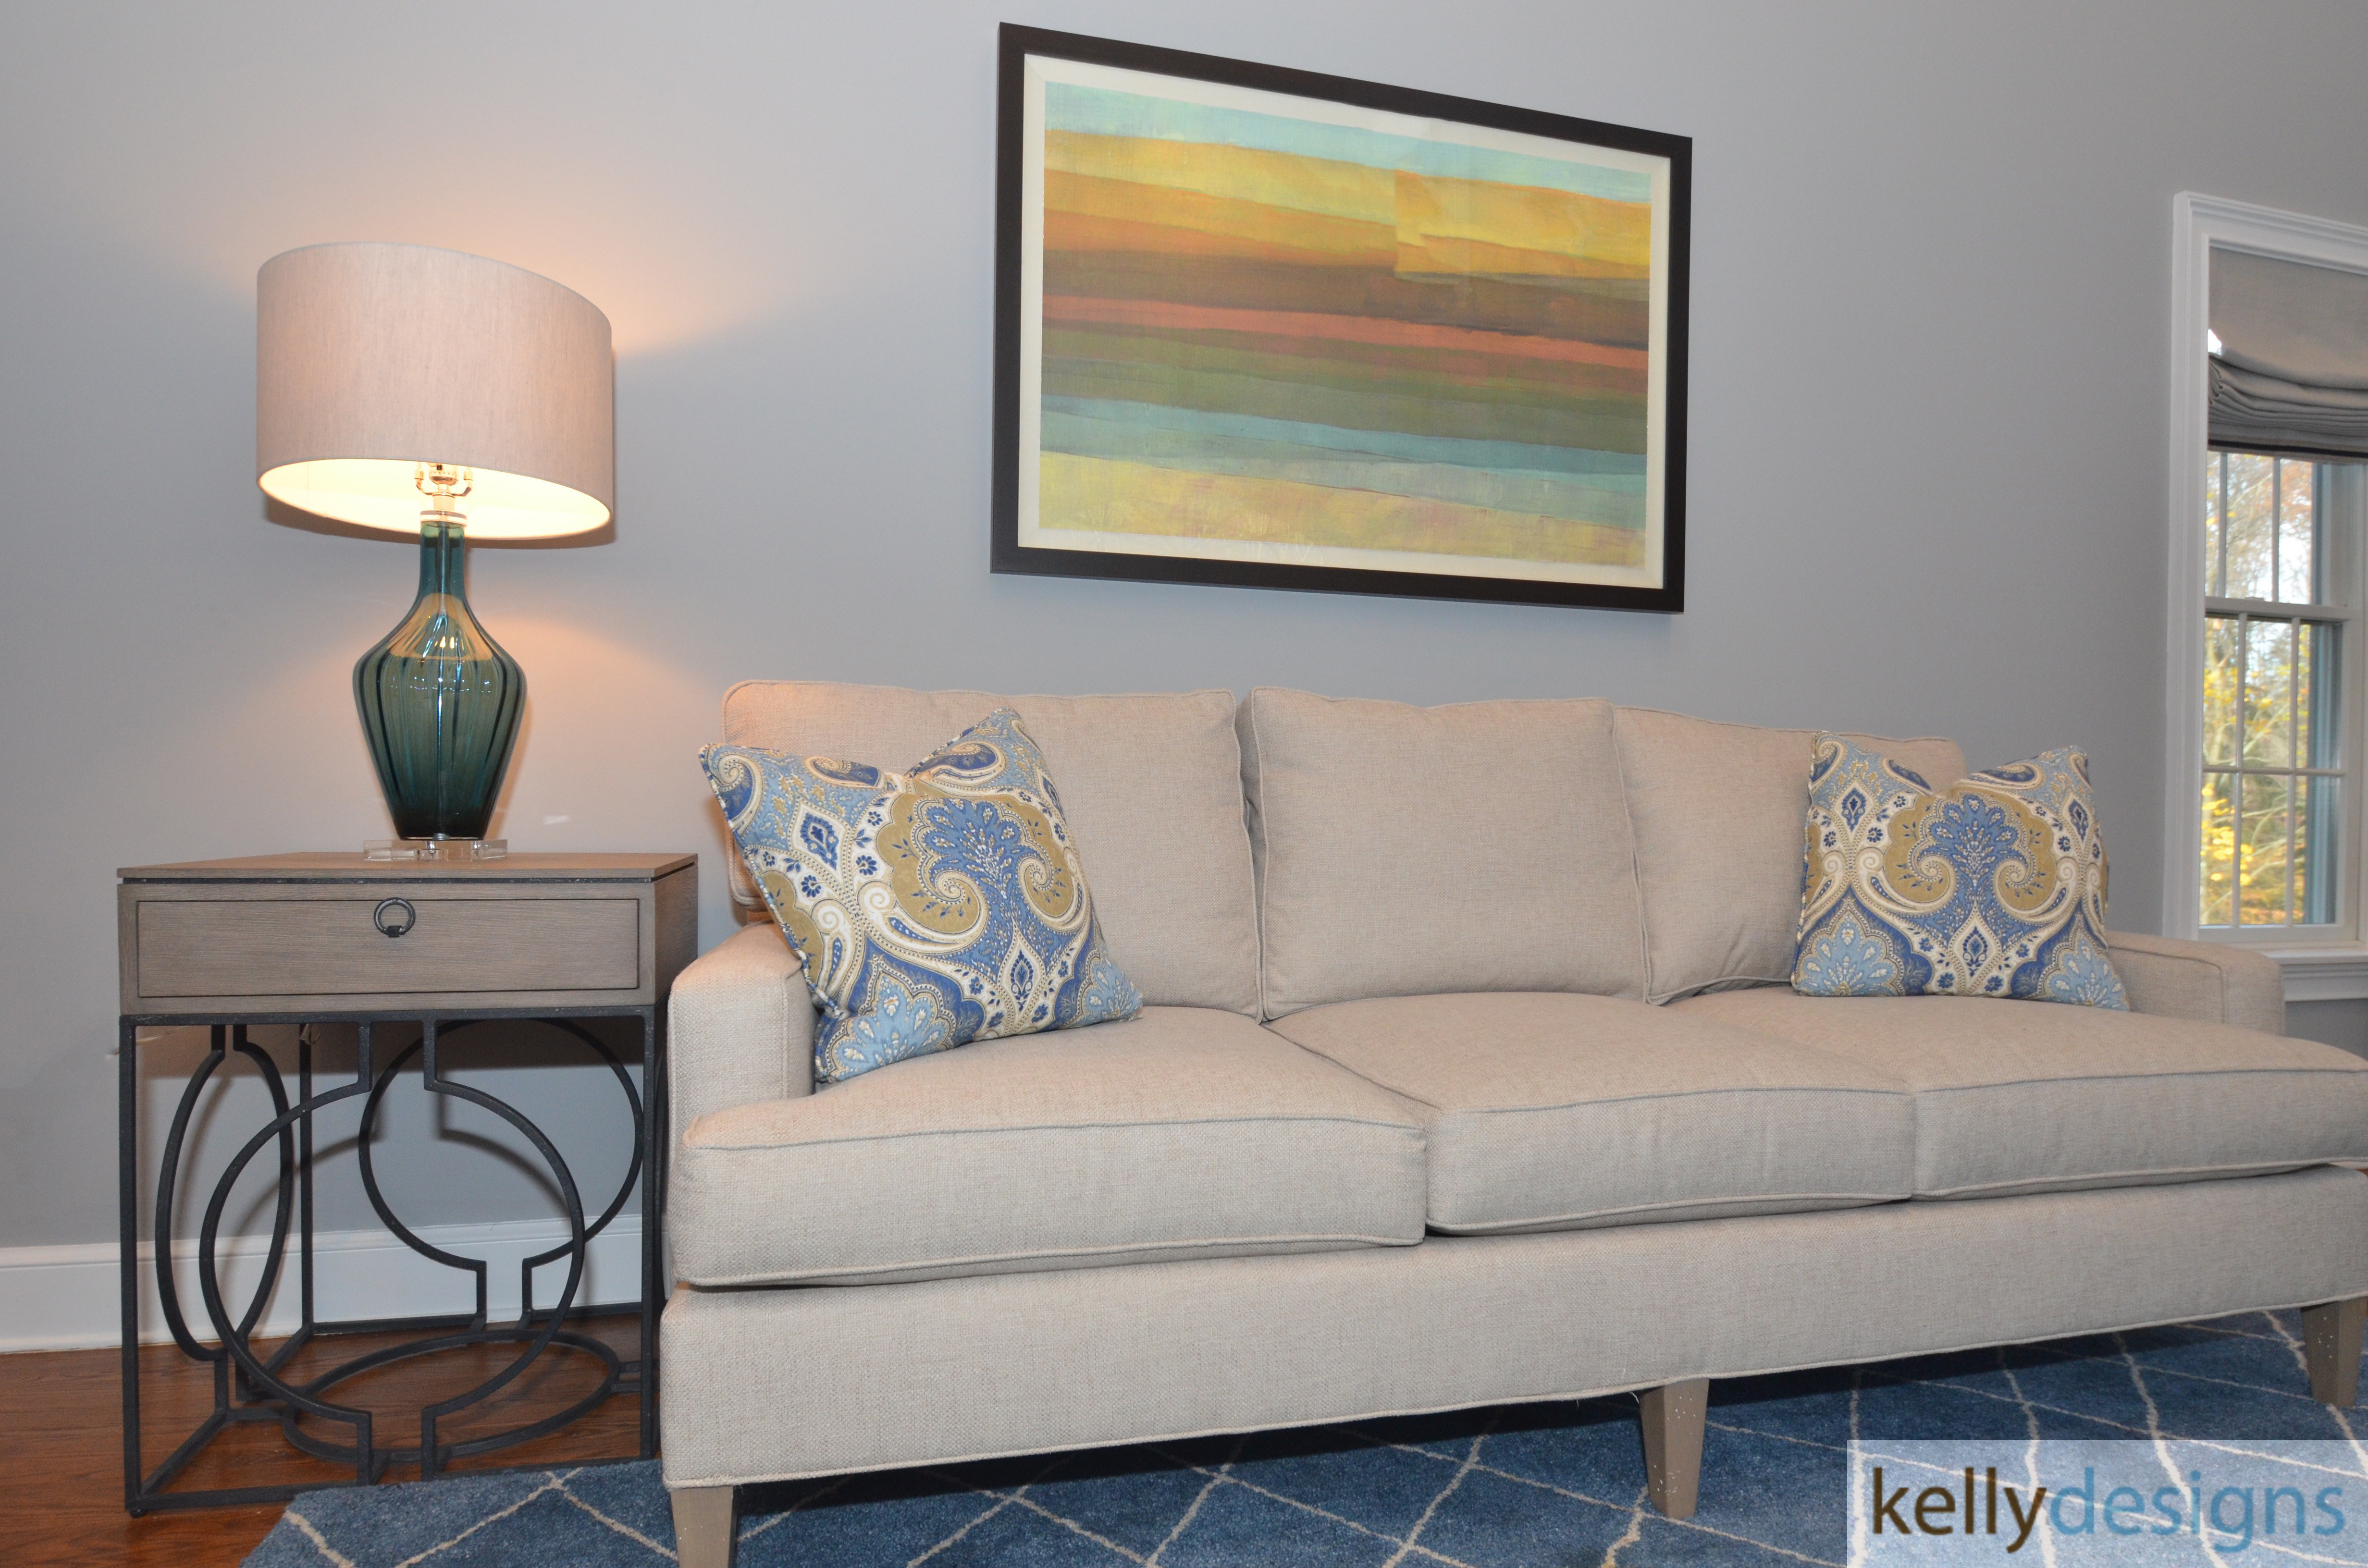 Delightful On Dudley   Family Room   Interior Design By Kellydesigns